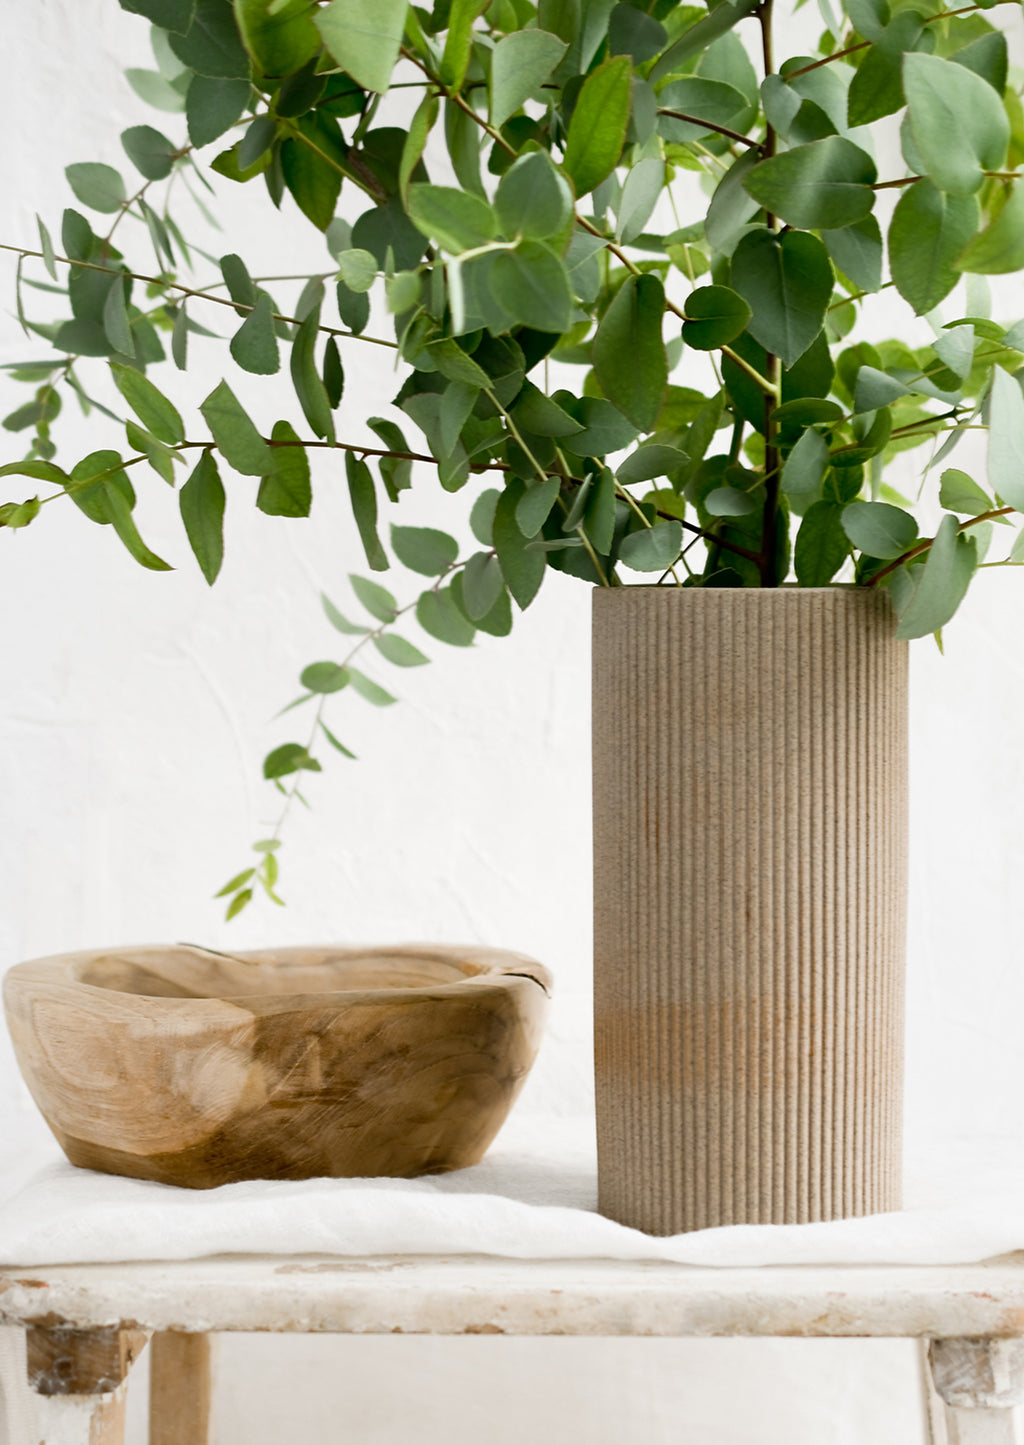 3: Eucalyptus in a sandy brown vase with wooden bowl.